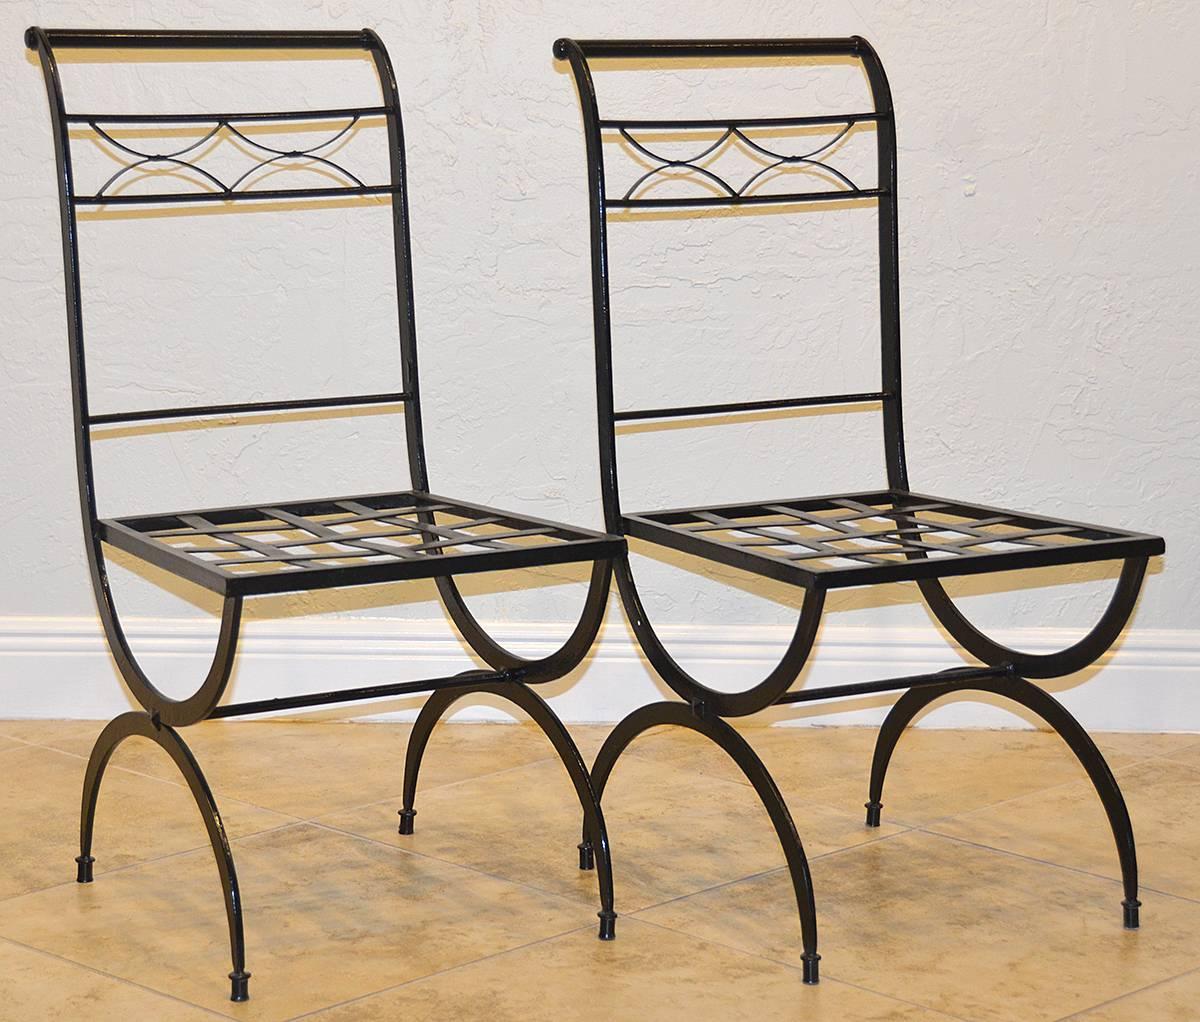 Set of eight French wrought iron chairs, circa 1920s Empire style. Great condition.